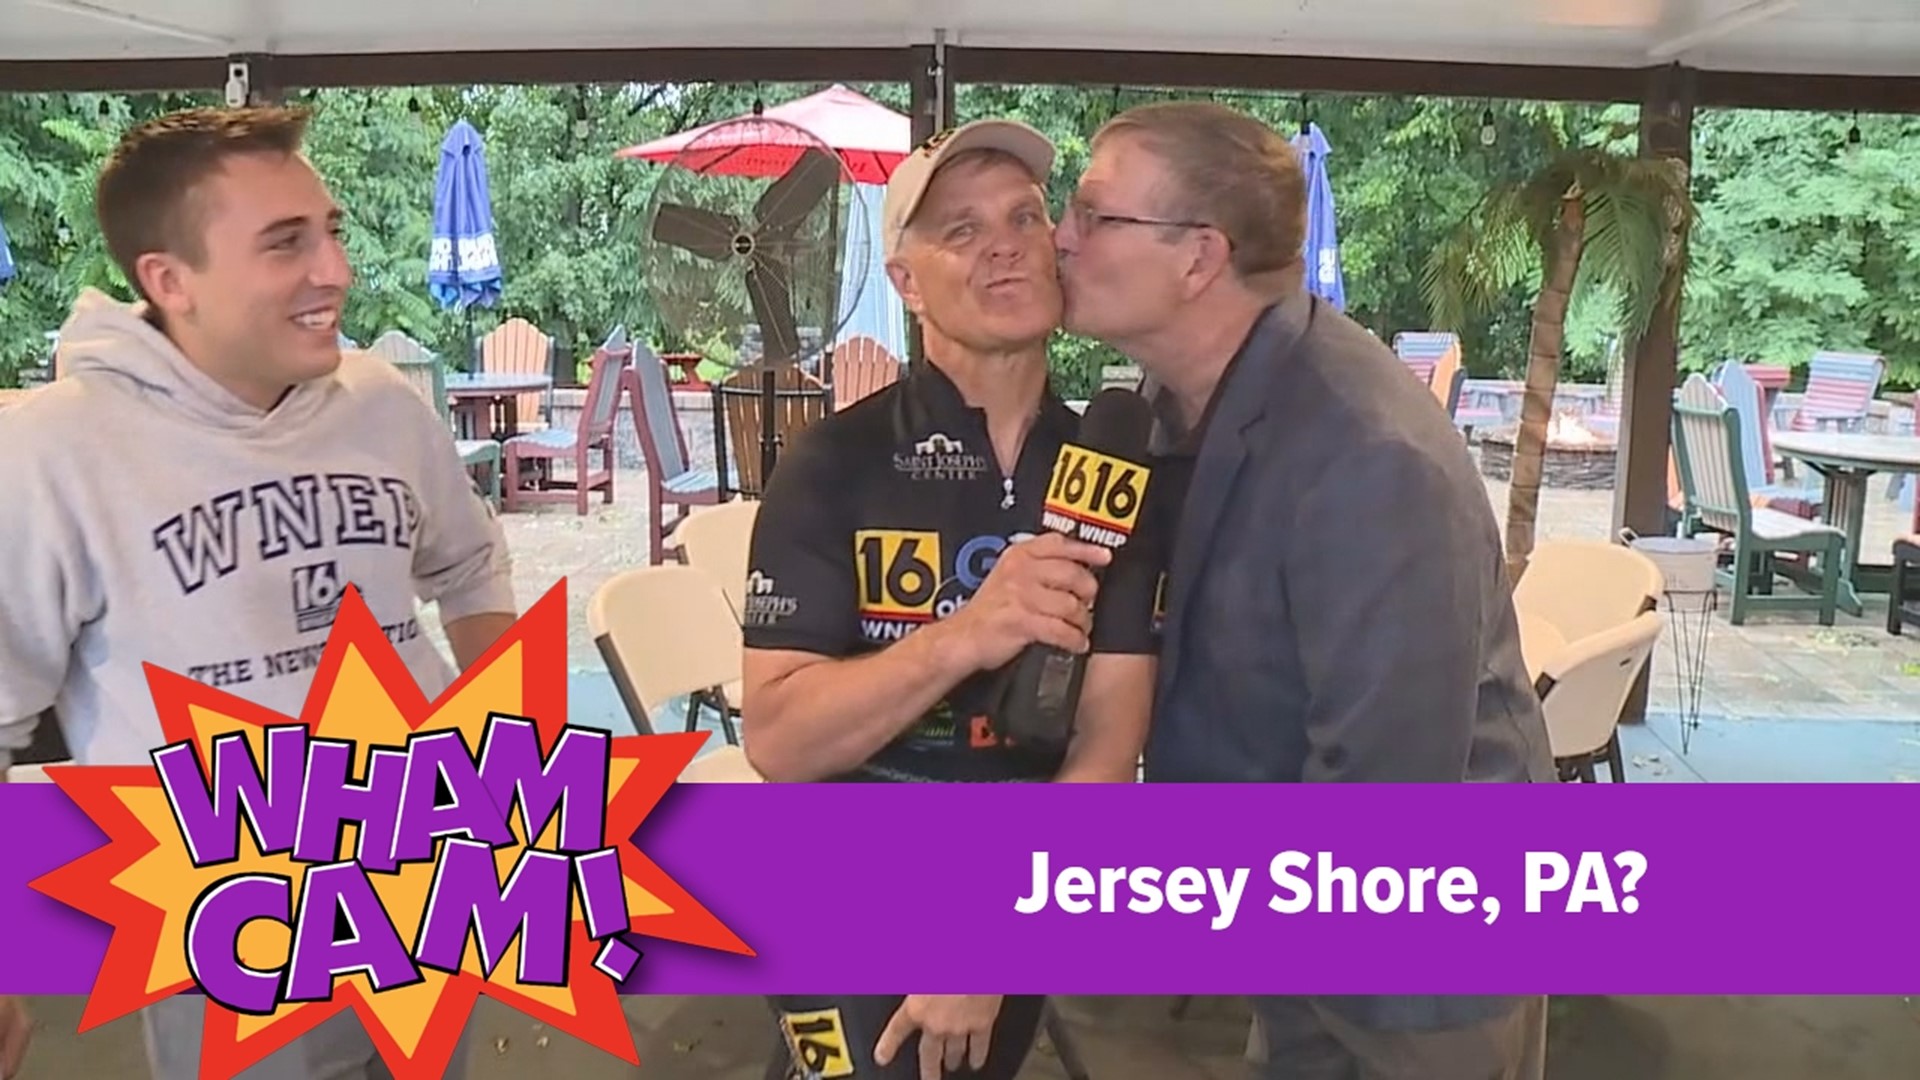 This week, Go Joe 25 started in Jersey Shore, Lycoming County. Ever wonder how that place in central PA got its name? Find out in this week's Wham Cam.